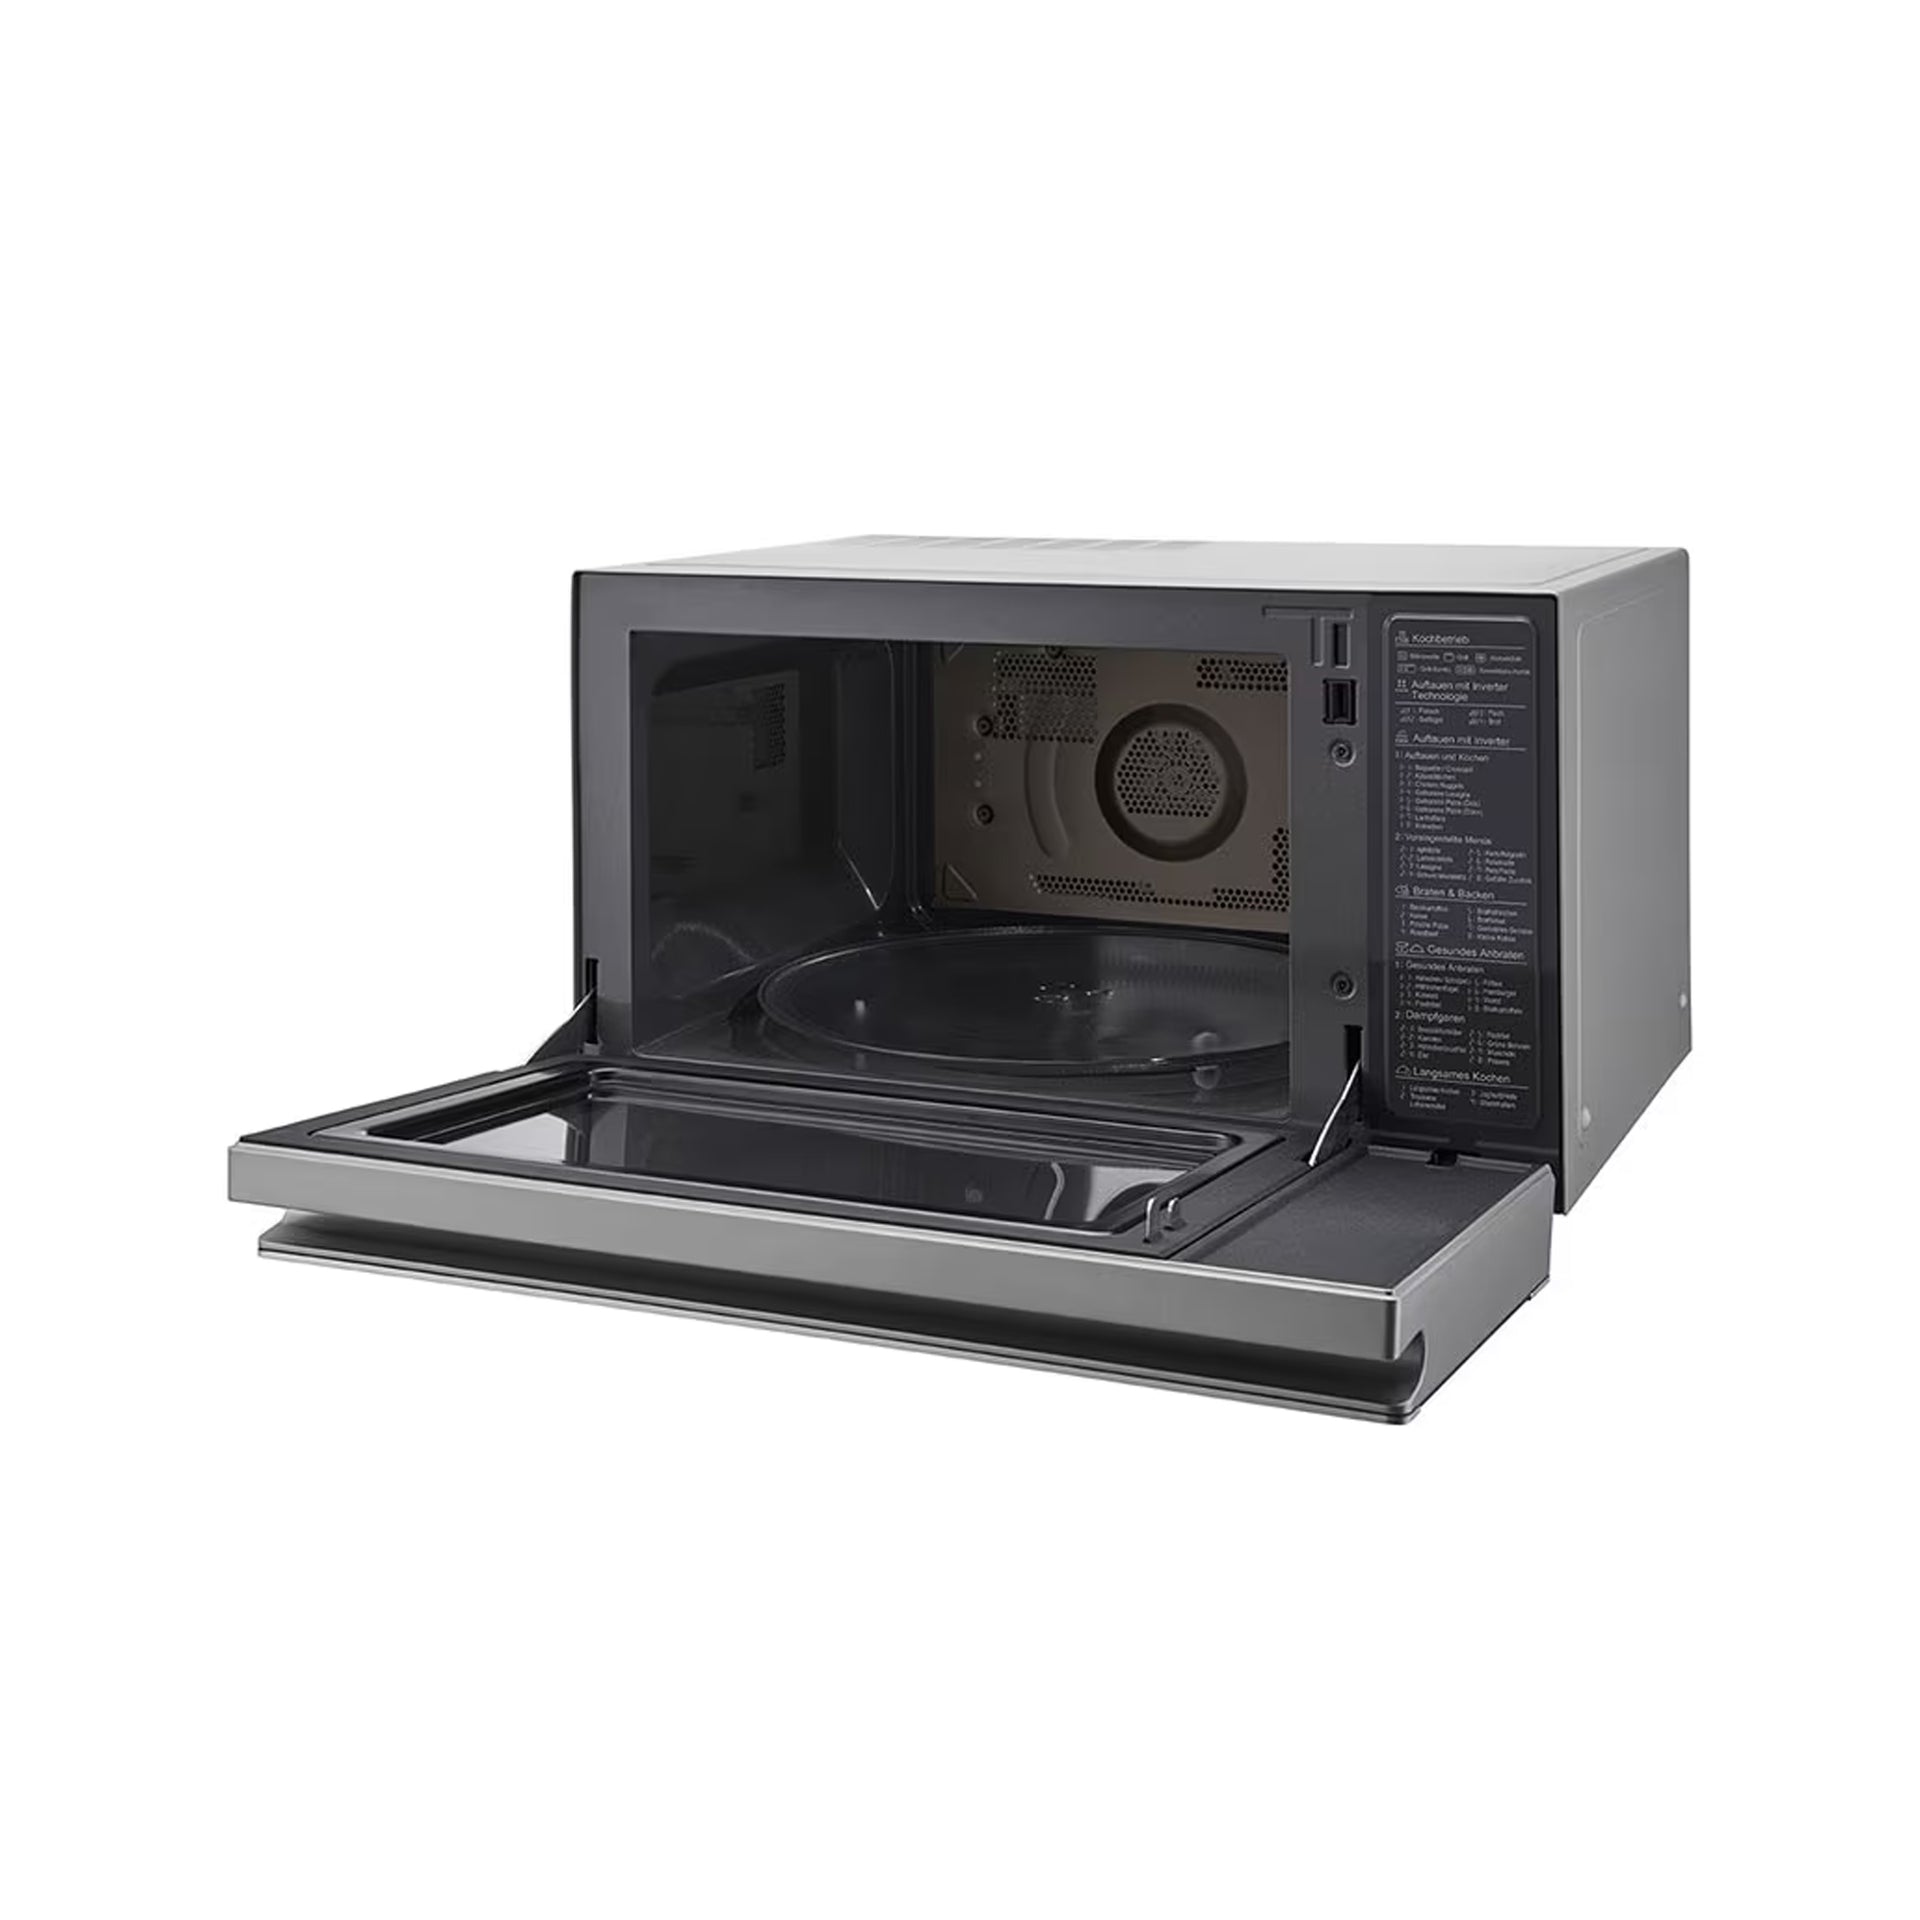 LG 39L NeoChef Convection Microwave Stainless Steel